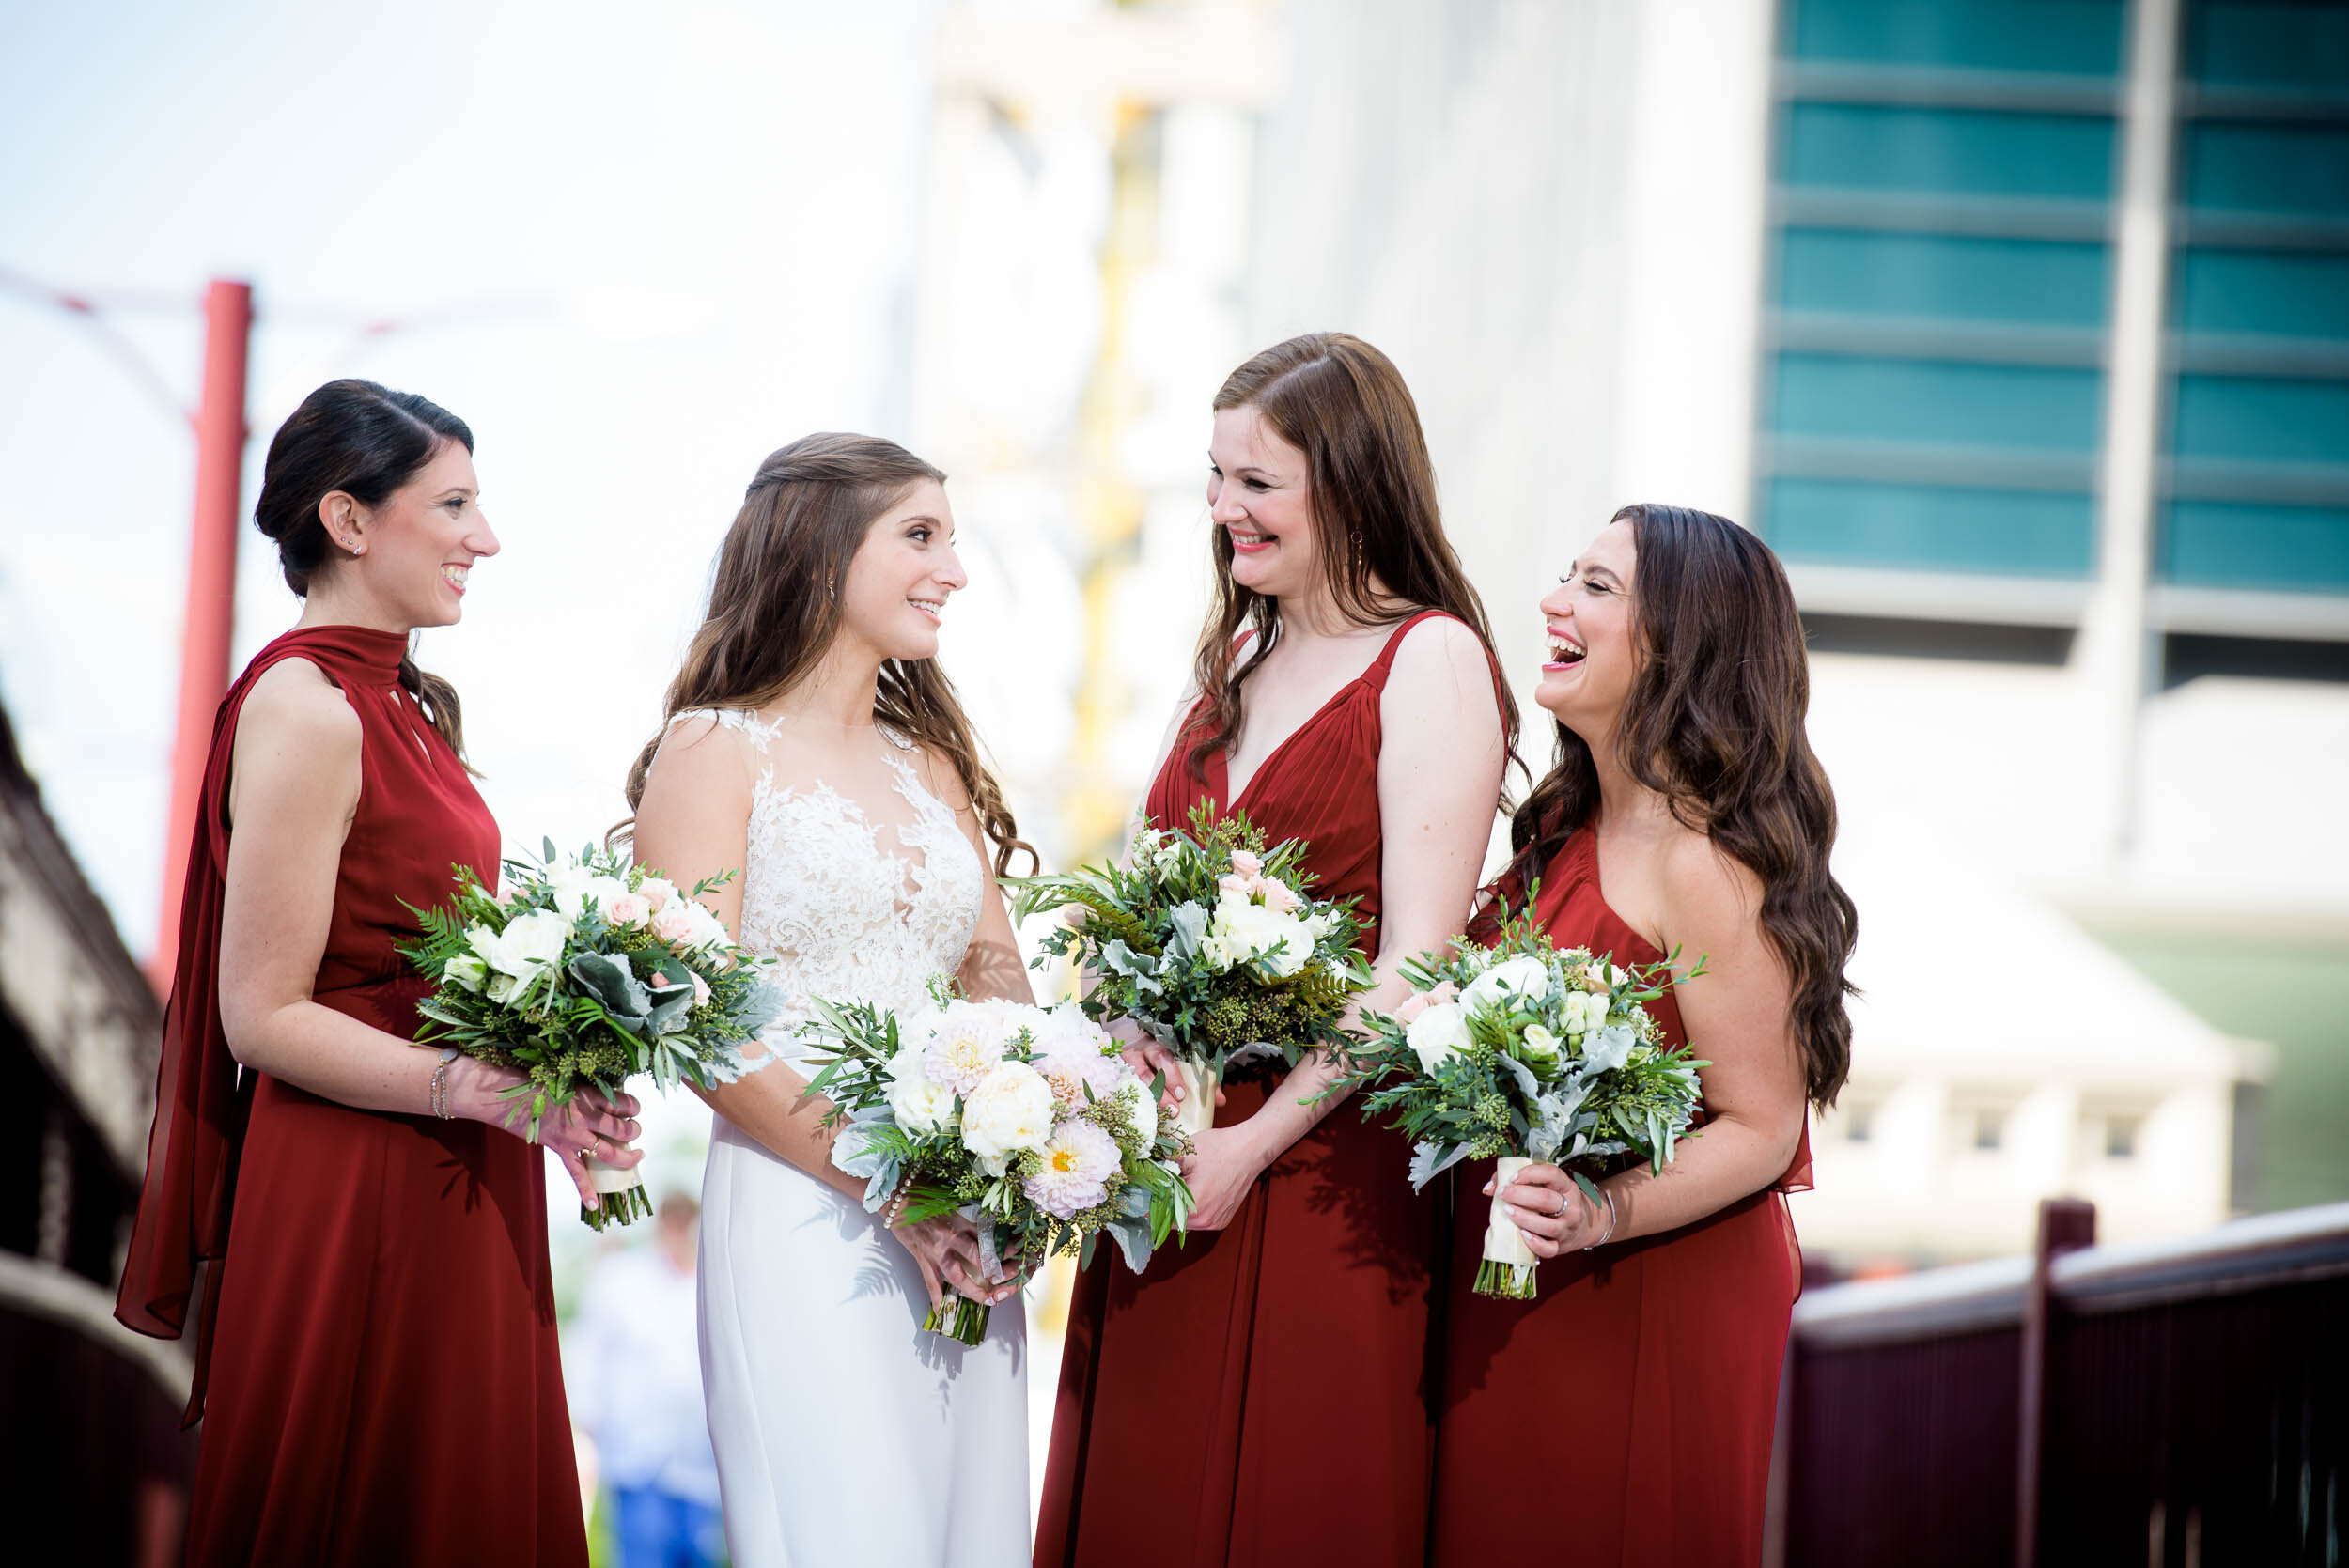 Bride laughs with her bridesmaids on the wedding day: Ravenswood Event Center Chicago wedding captured by J. Brown Photography.  